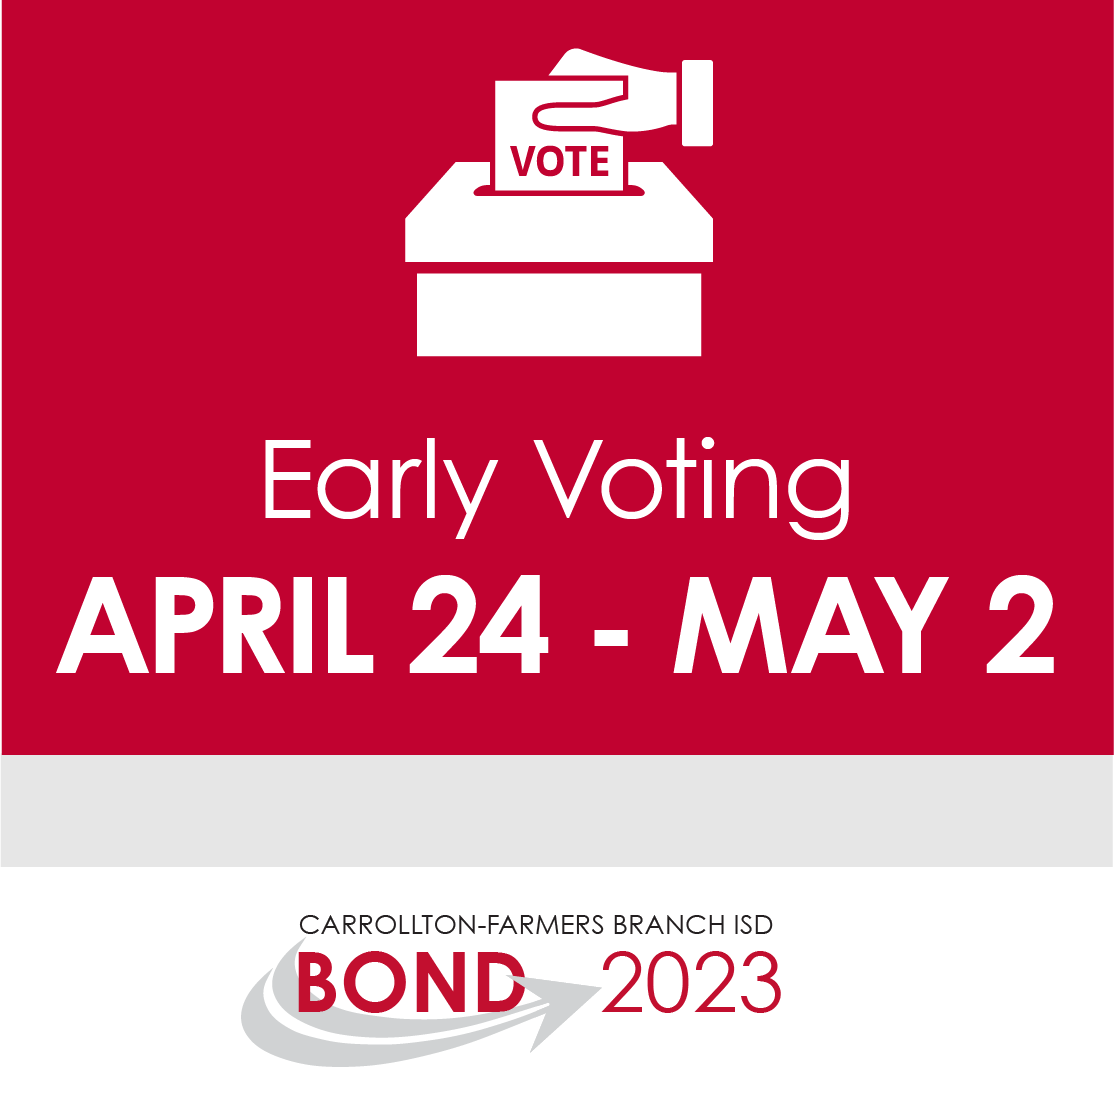 REMINDER: Early Voting is now underway! Have you voted? Share a selfie with your #IVoted sticker below! #CFBvotes #CFBISDBond